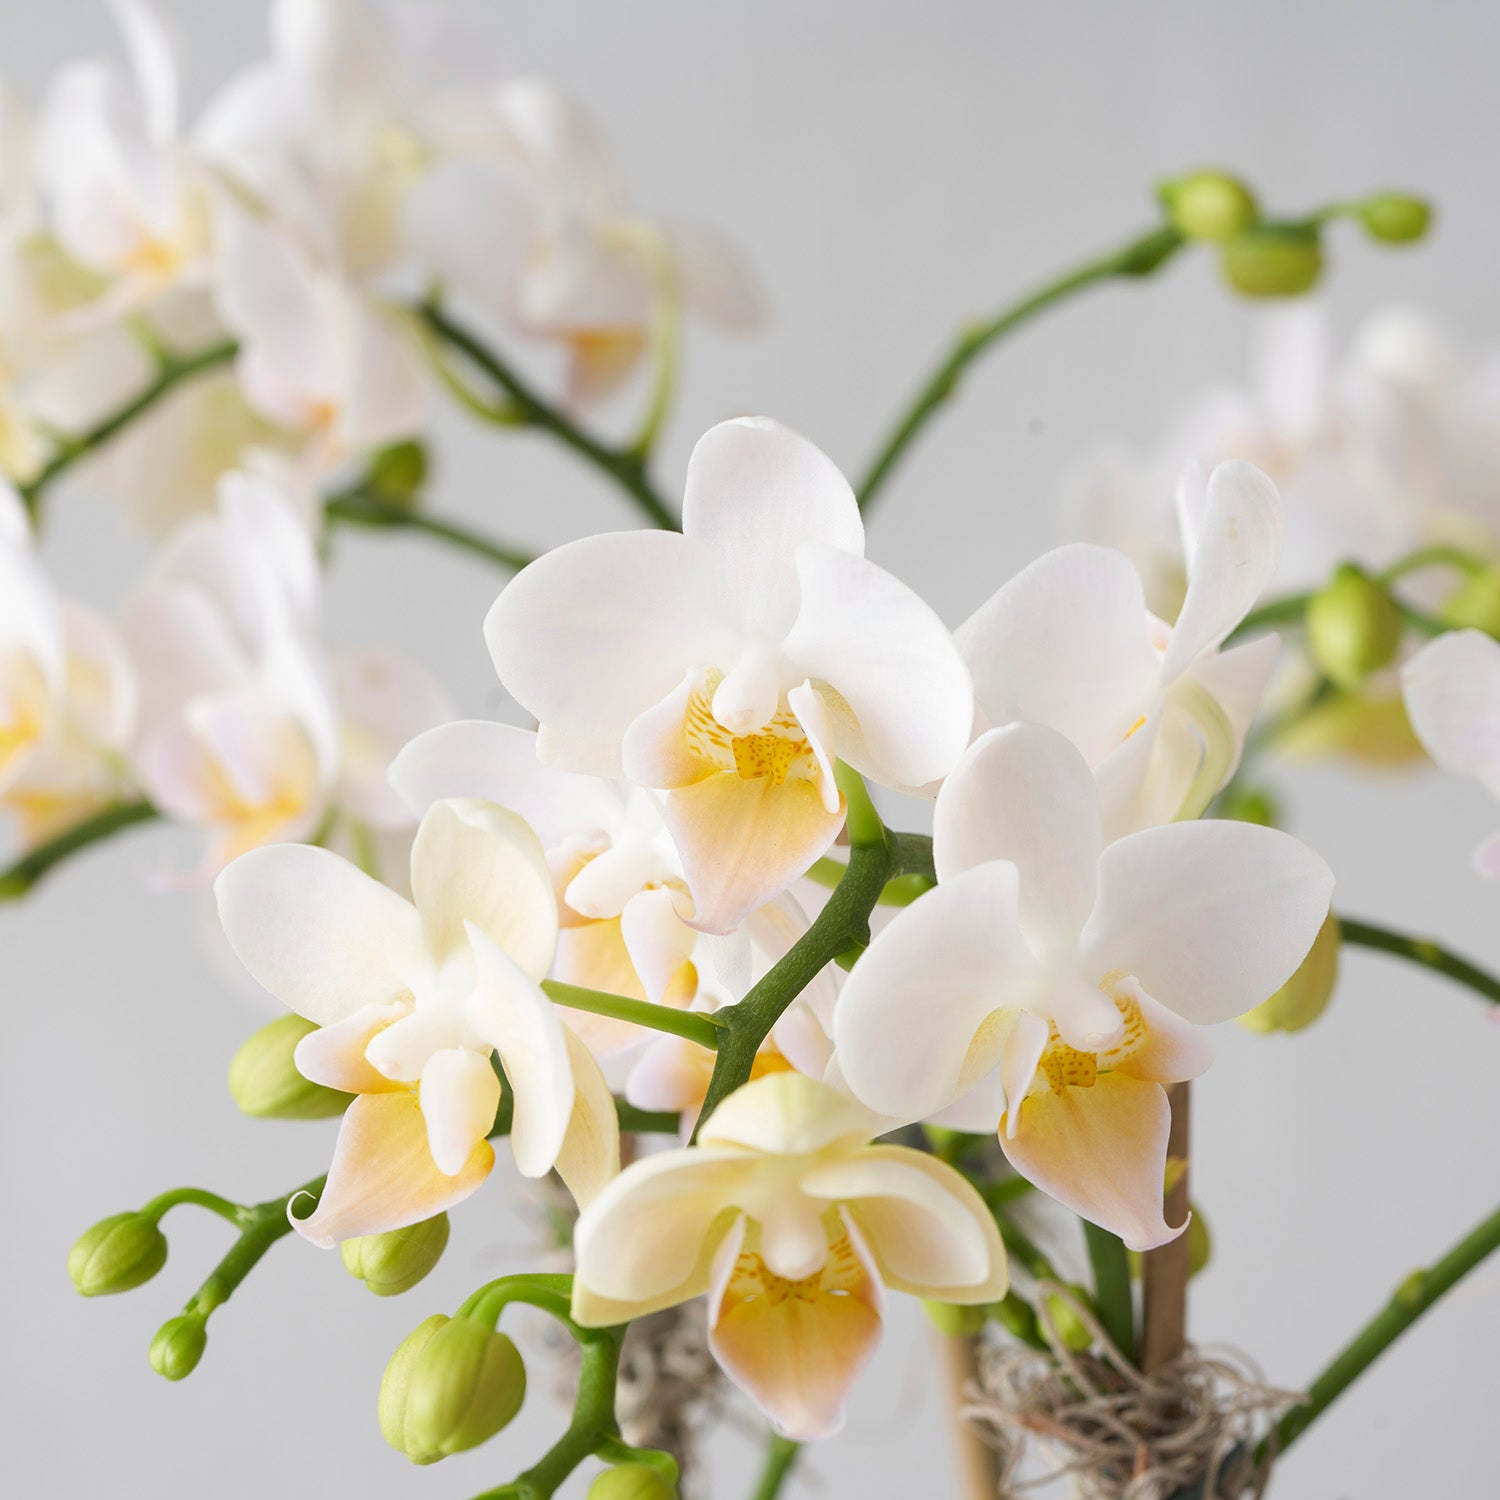 Close up of miniature white phalaenopsis orchid flowers.